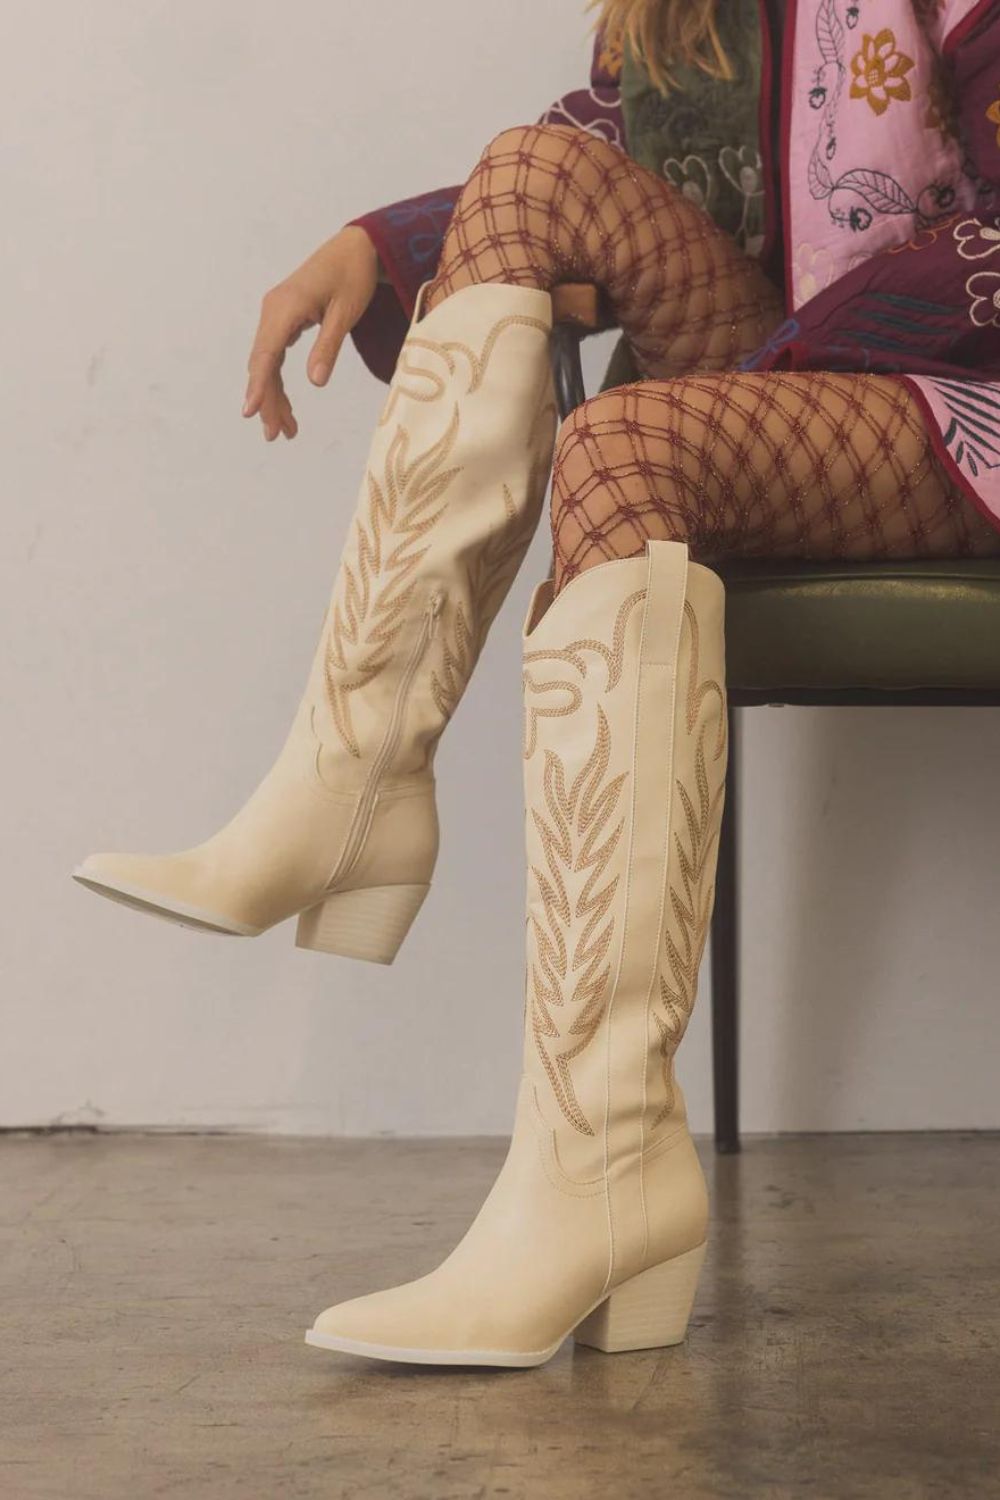 Coastal Cowgirl Boots | Bohemian Western | Knee High | Cream - Women&#39;s Boots - Blooming Daily